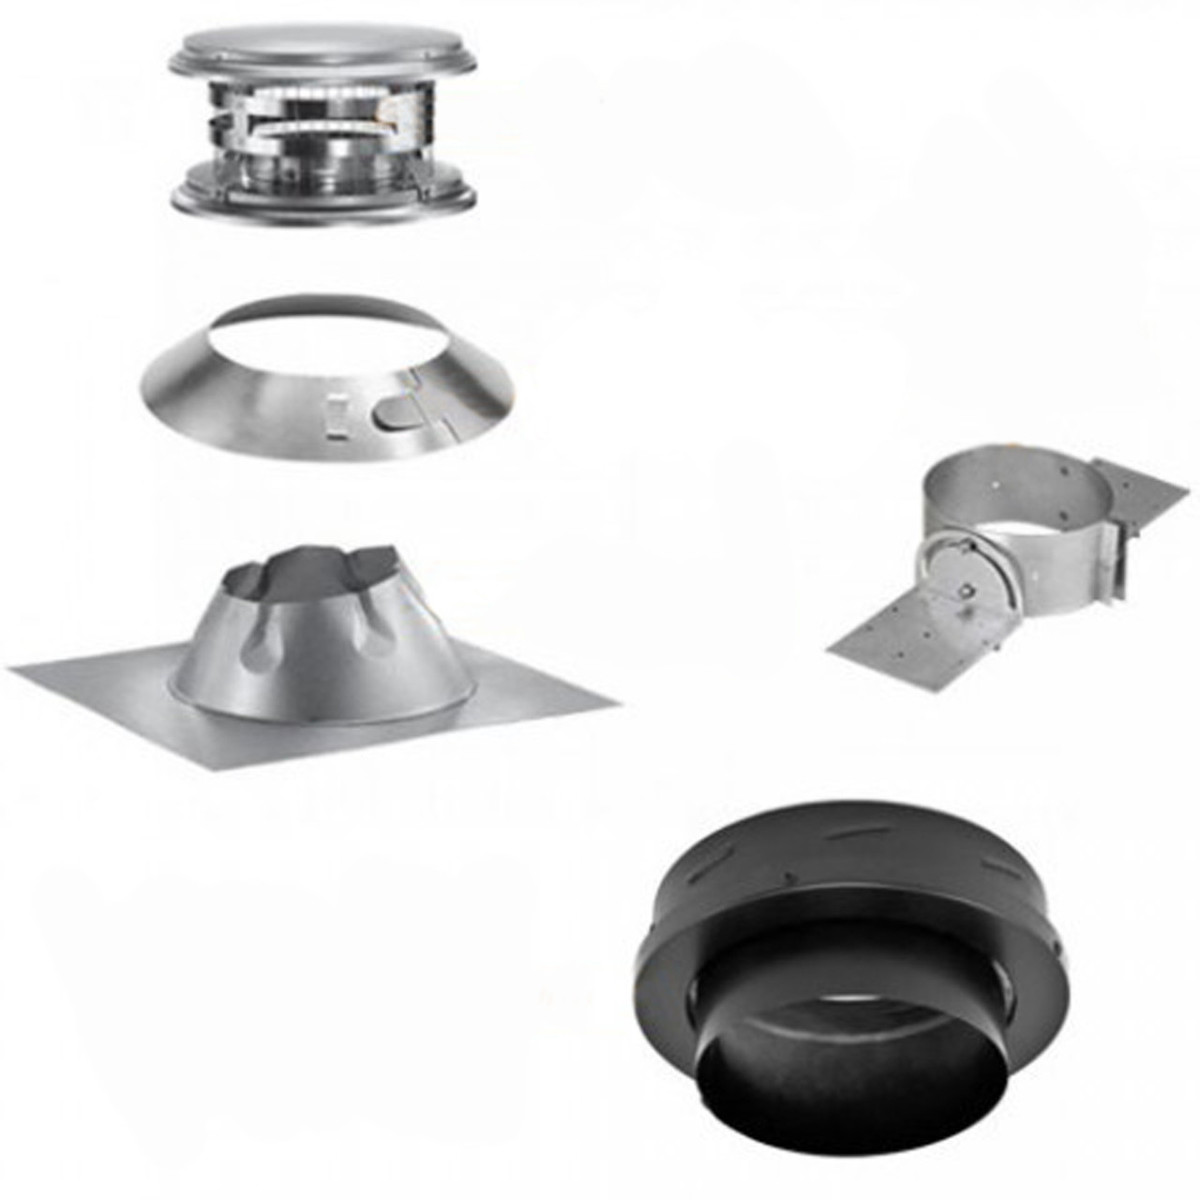 Through The Attic Kit for 6 Inner Diameter Chimney Pipe with Spark Guard  Chimney Cap 11 Support Box / Flat Roof Flashing